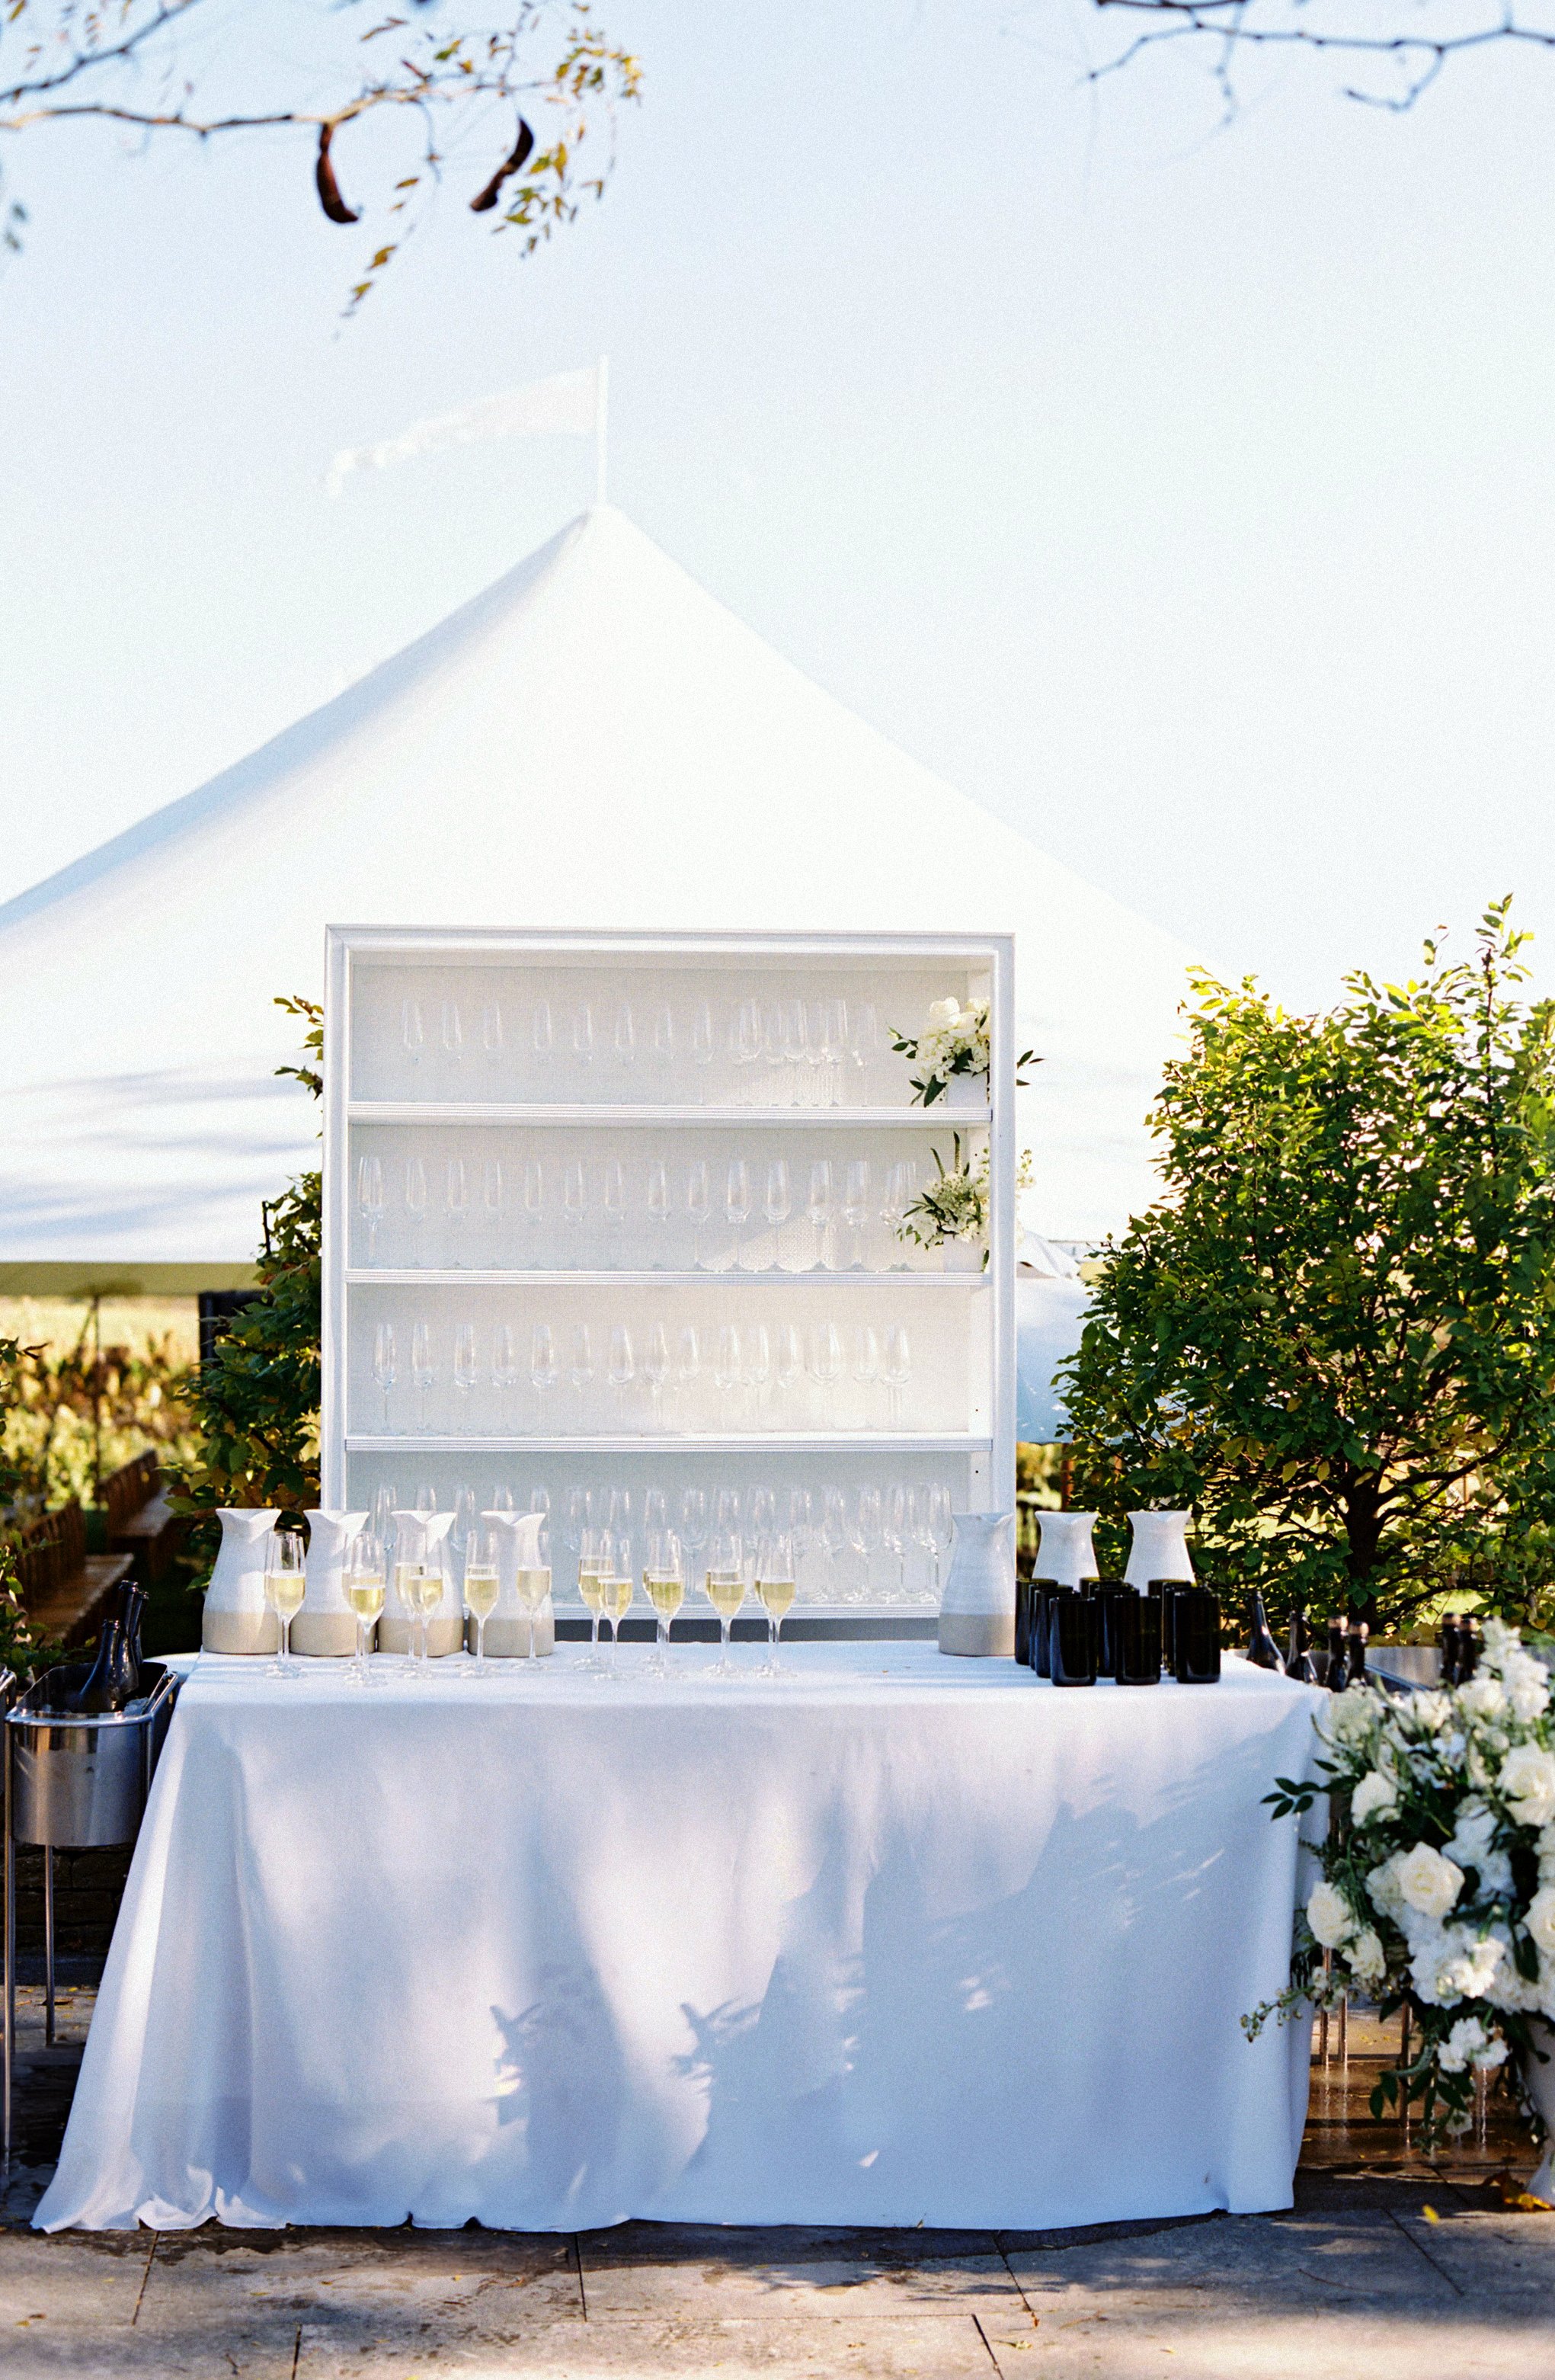 Wedding ceremony welcome champagne bar at Ashbourne Farms designed by Makers House